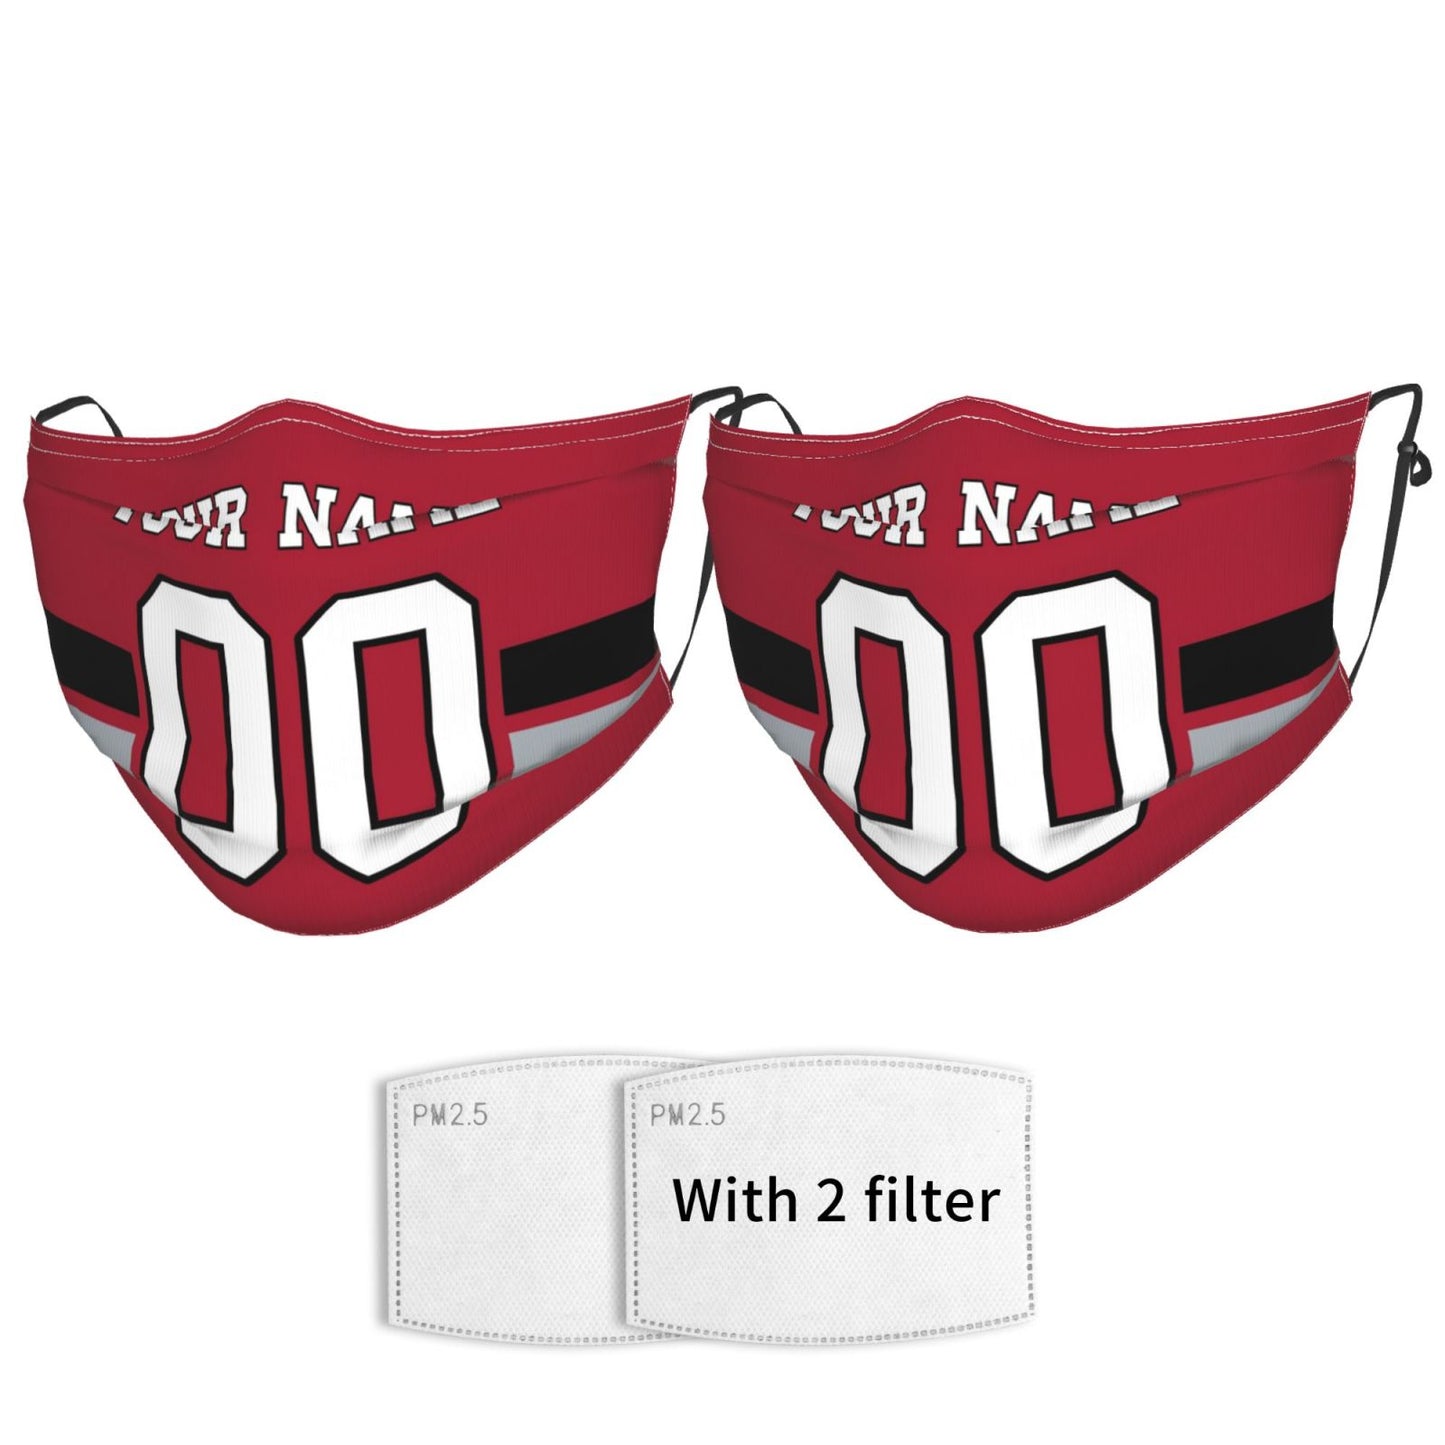 2-Pack Atlanta Falcons Face Covering Football Team Decorative Adult Face Mask With Filters PM 2.5 Red